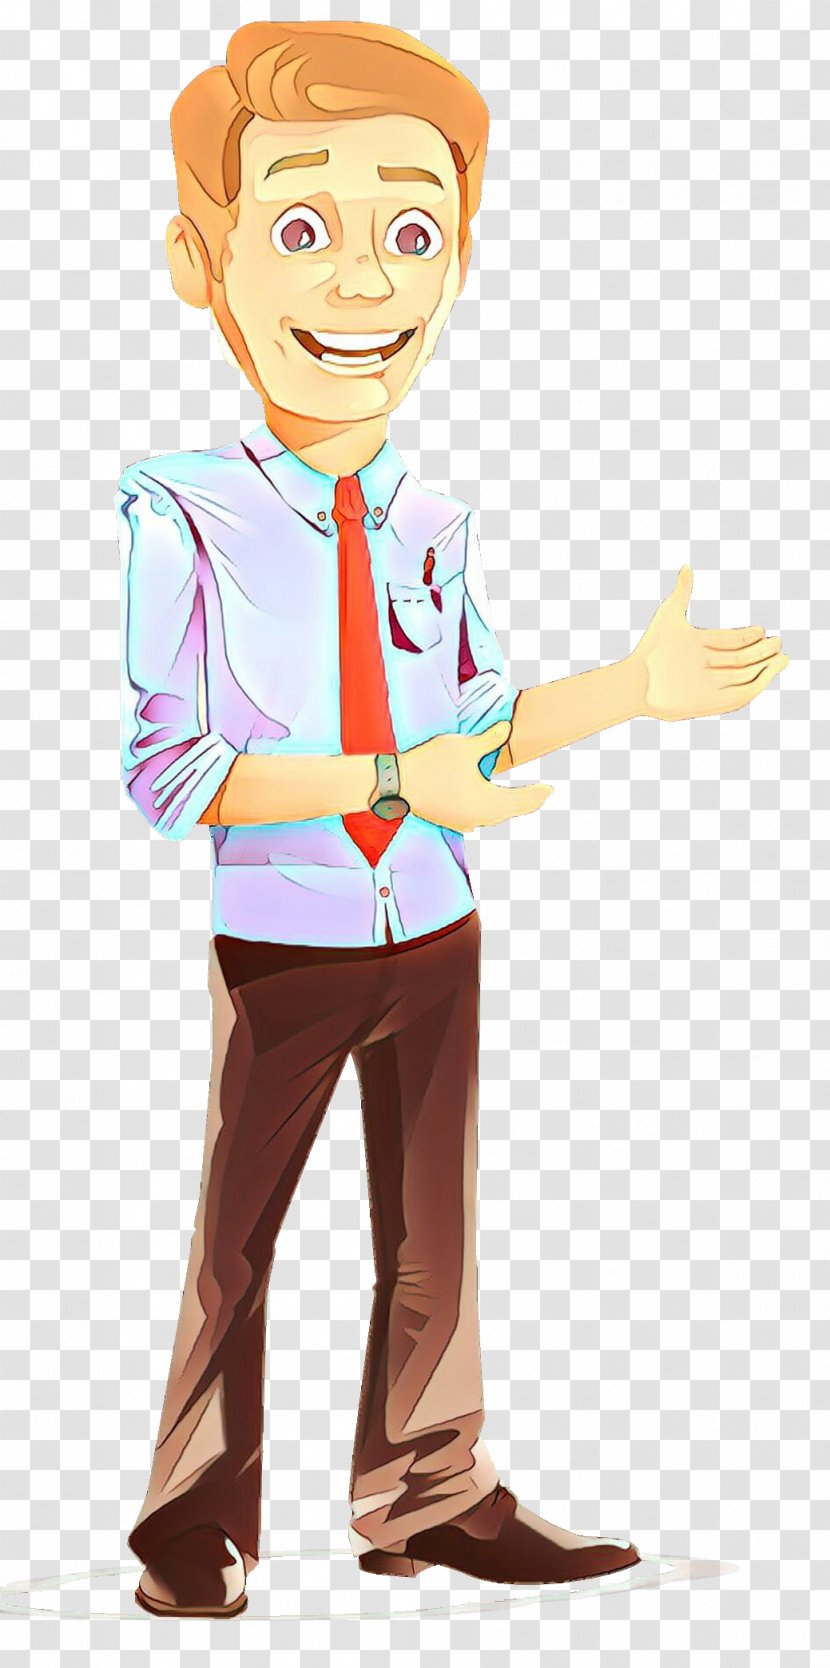 Cartoon - Character - Style Gesture Transparent PNG